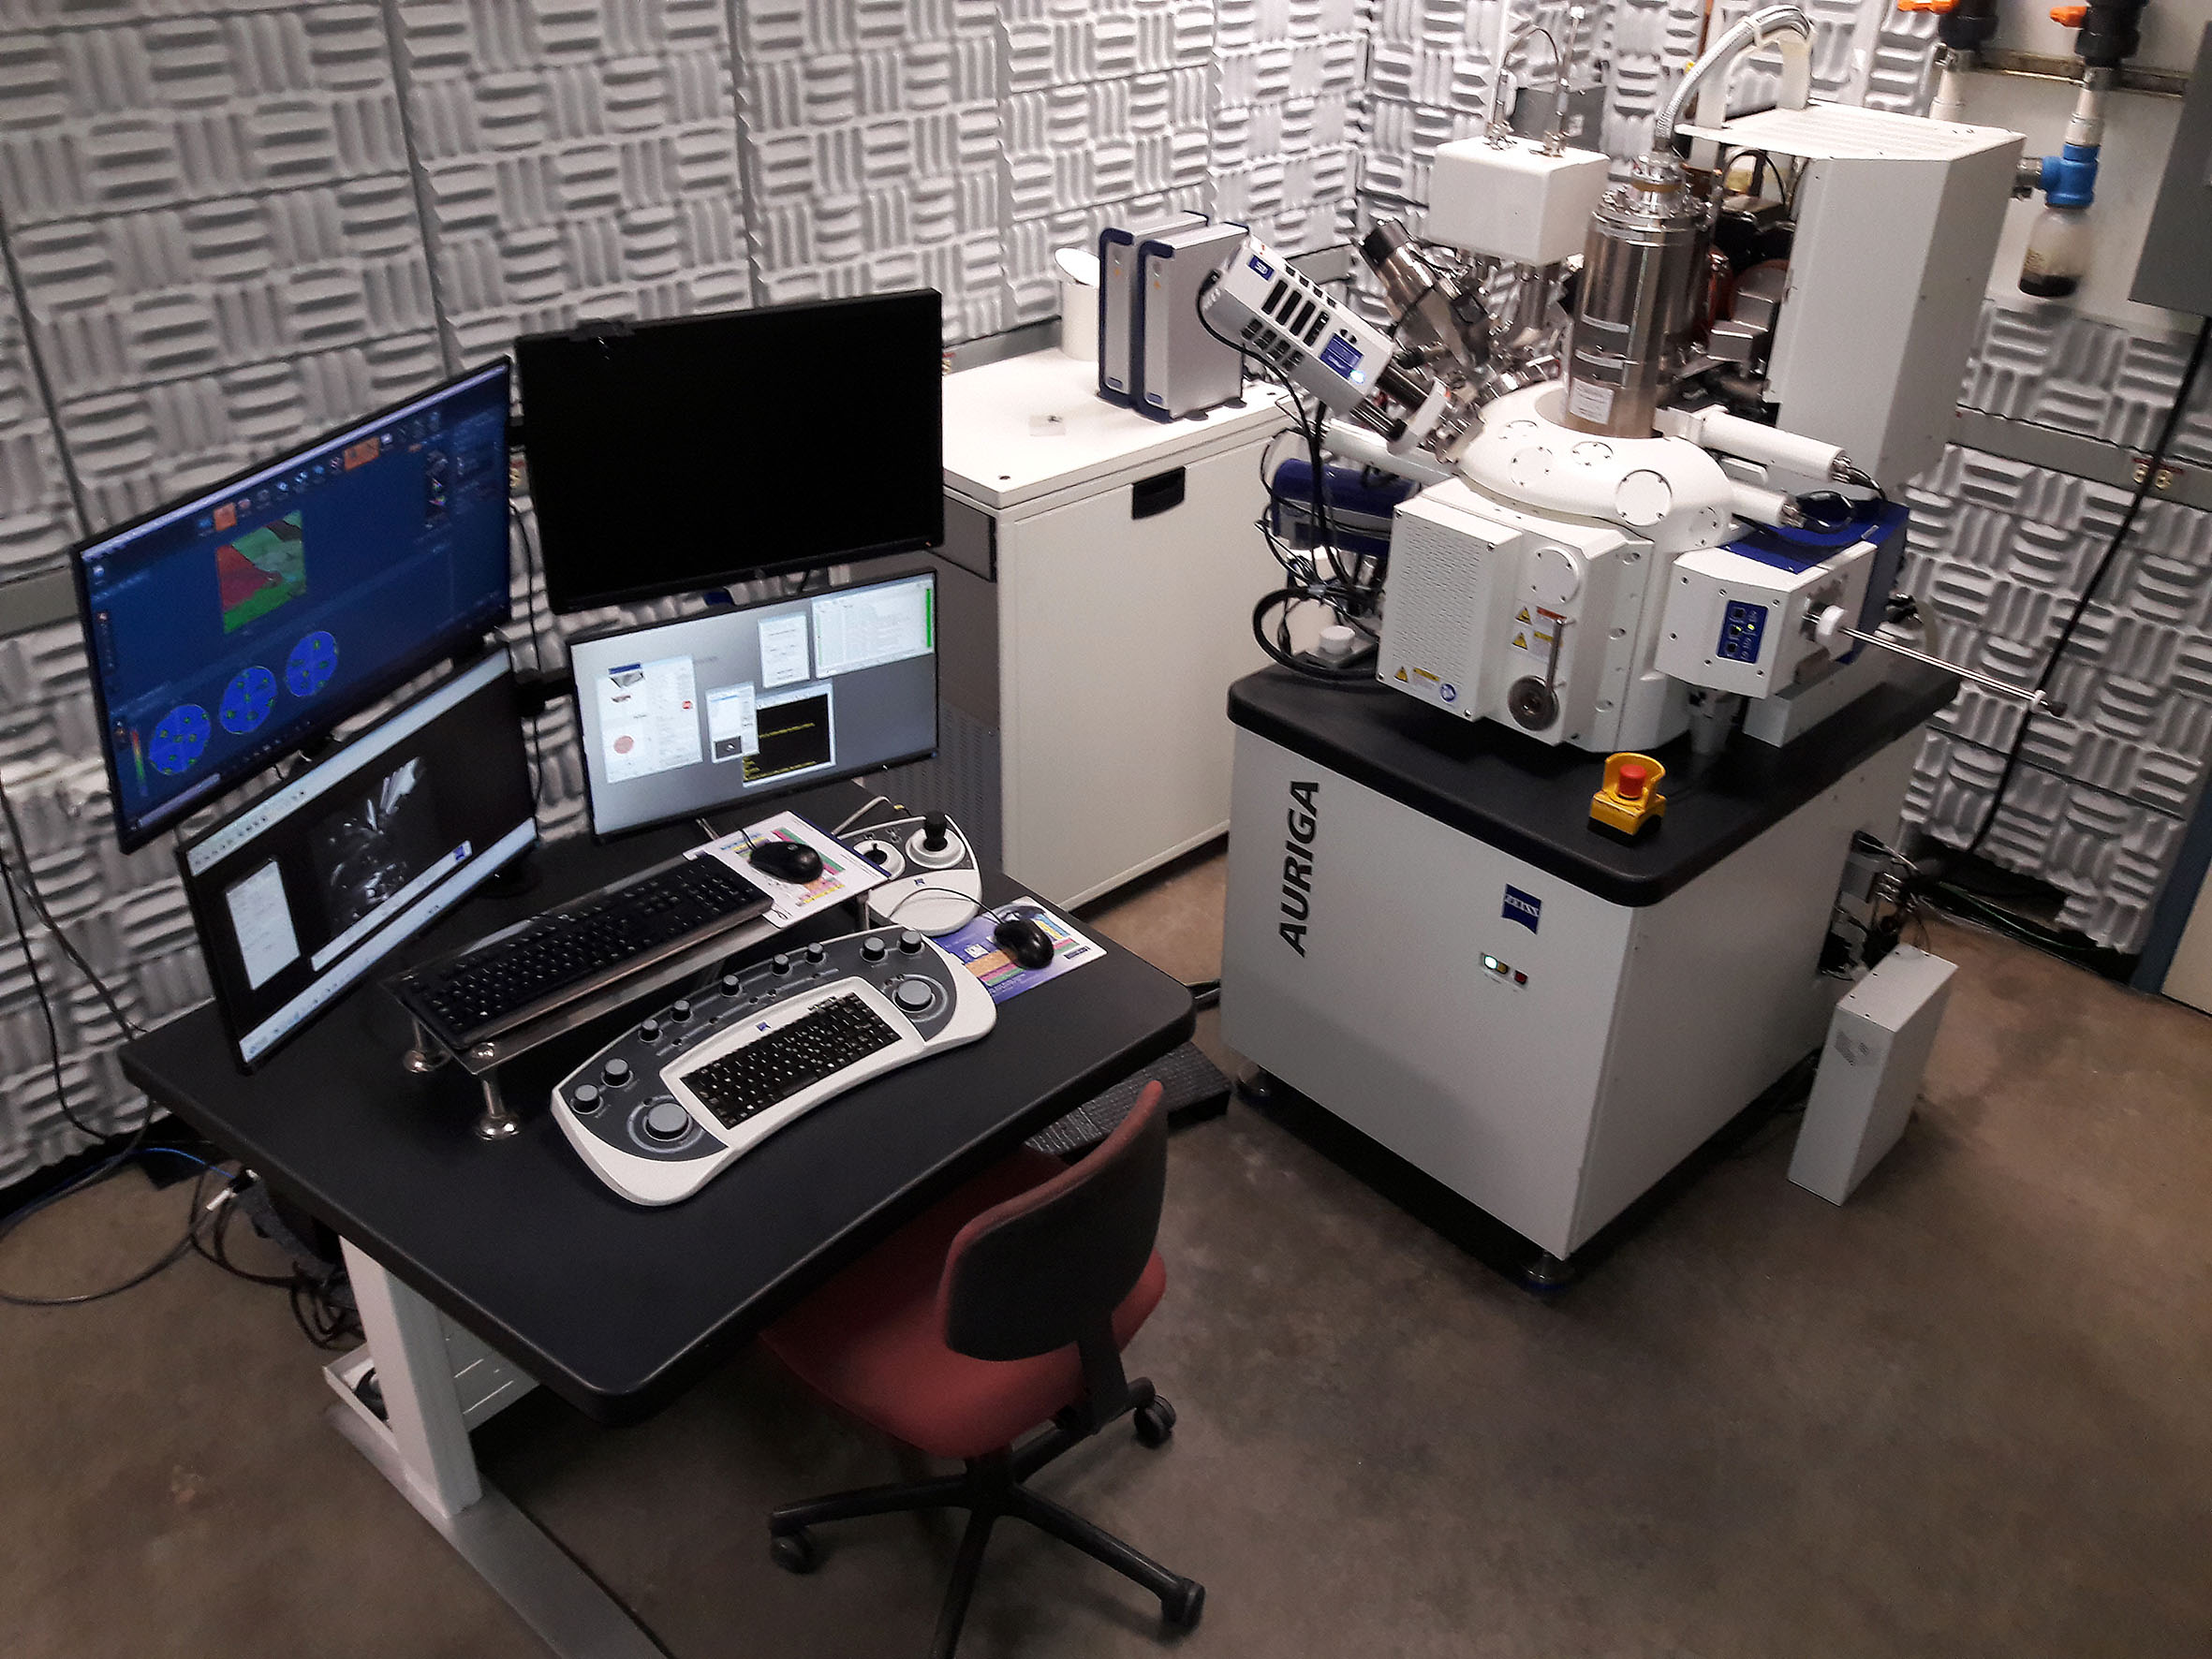 Auriga workstation with new EBSD detector